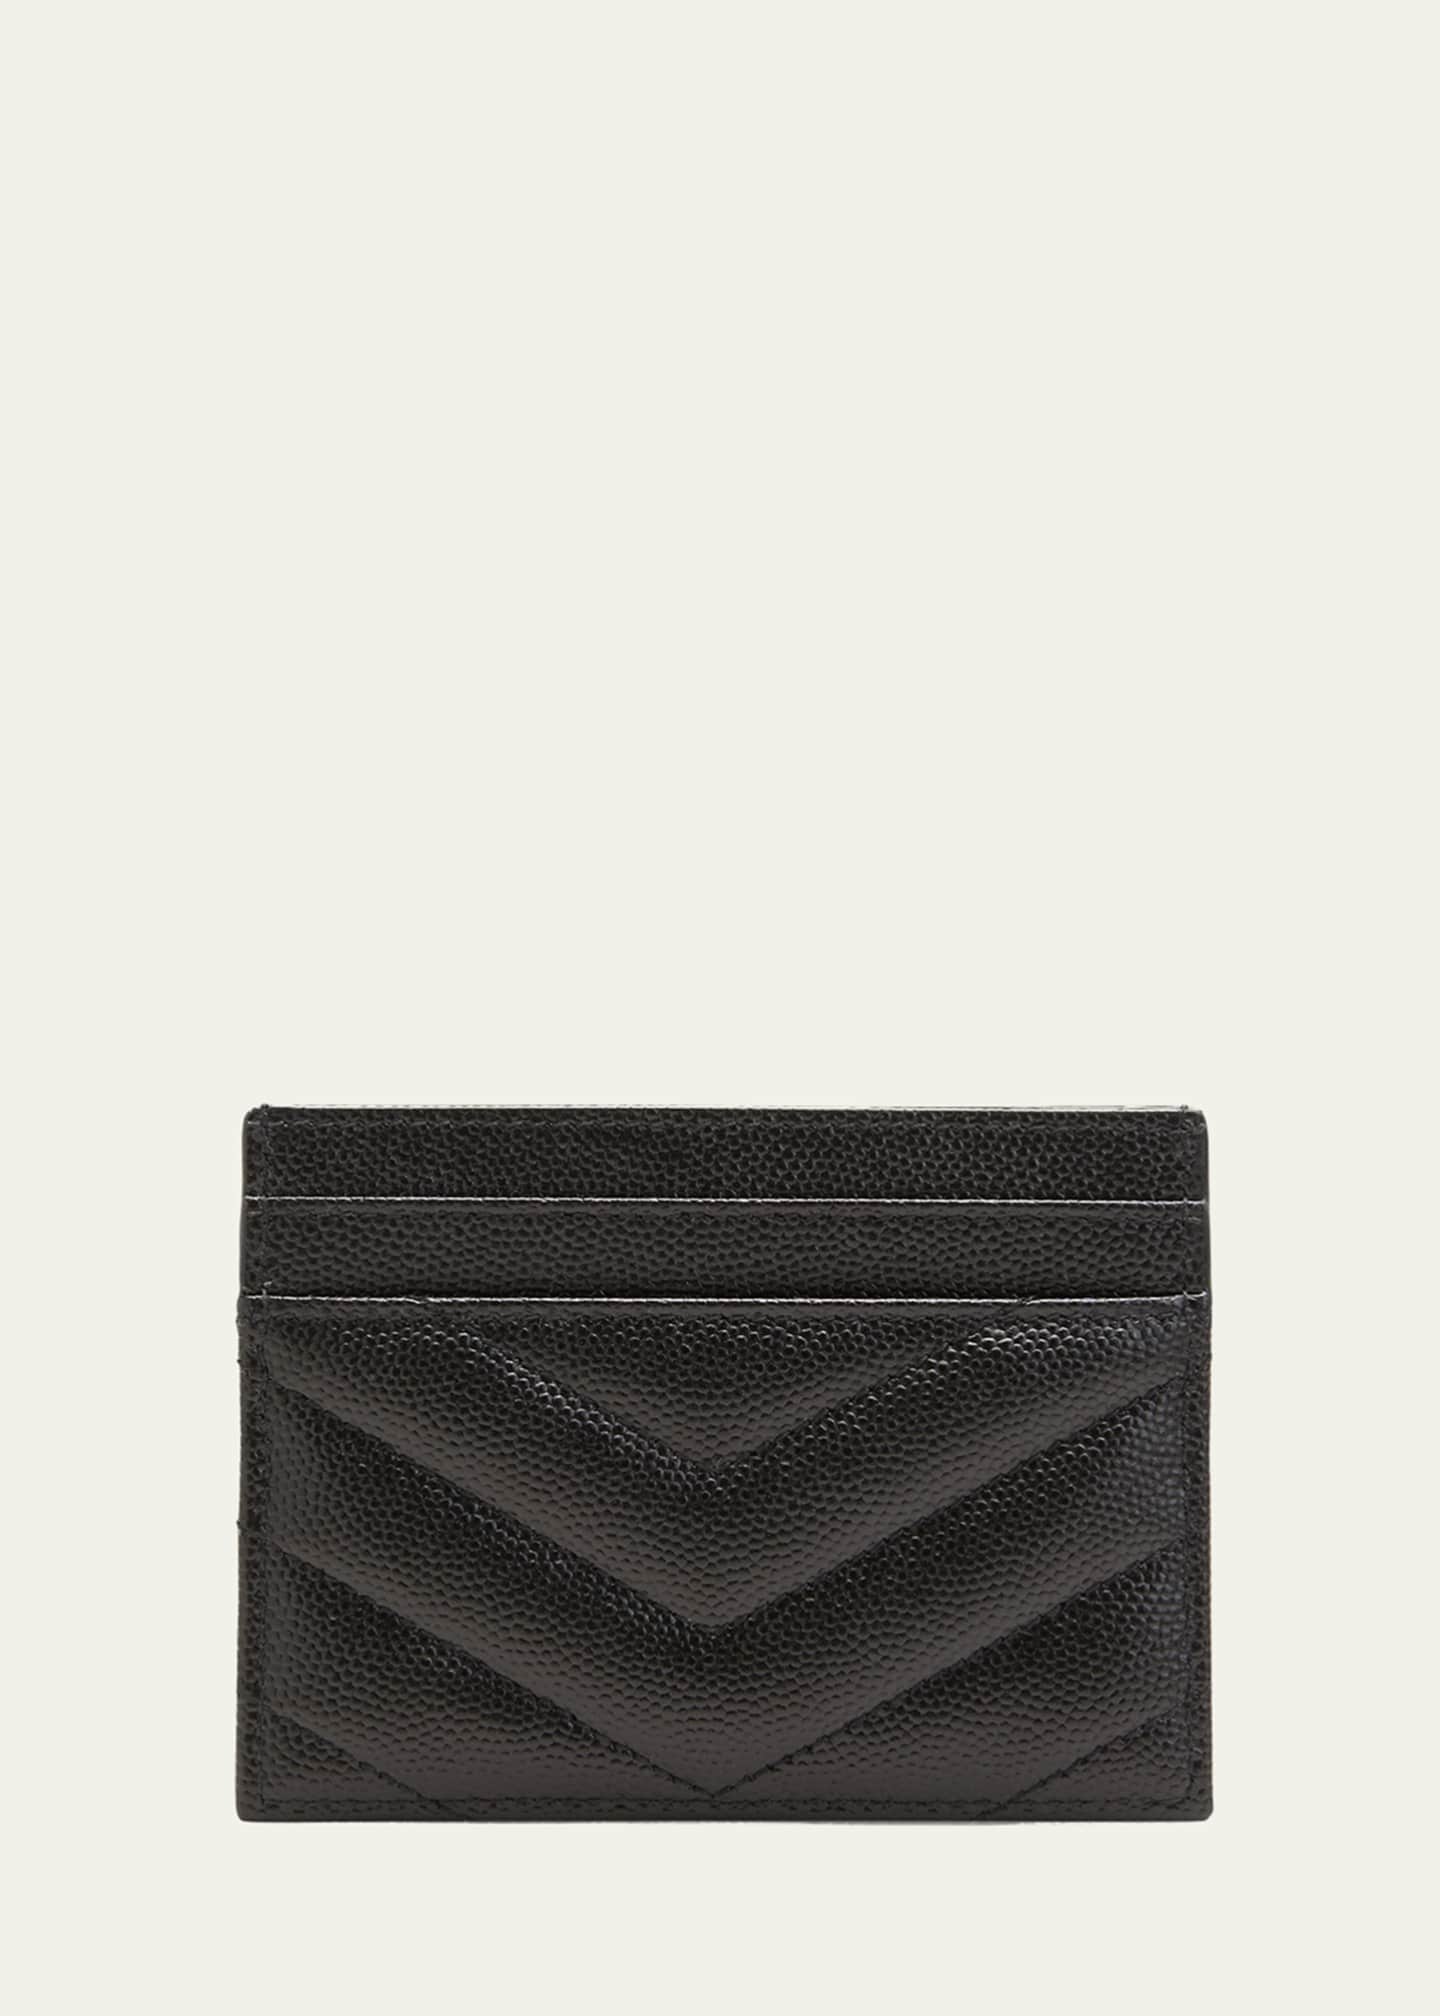 Saint Laurent YSL Monogram Card Case in Grained Leather Image 3 of 4